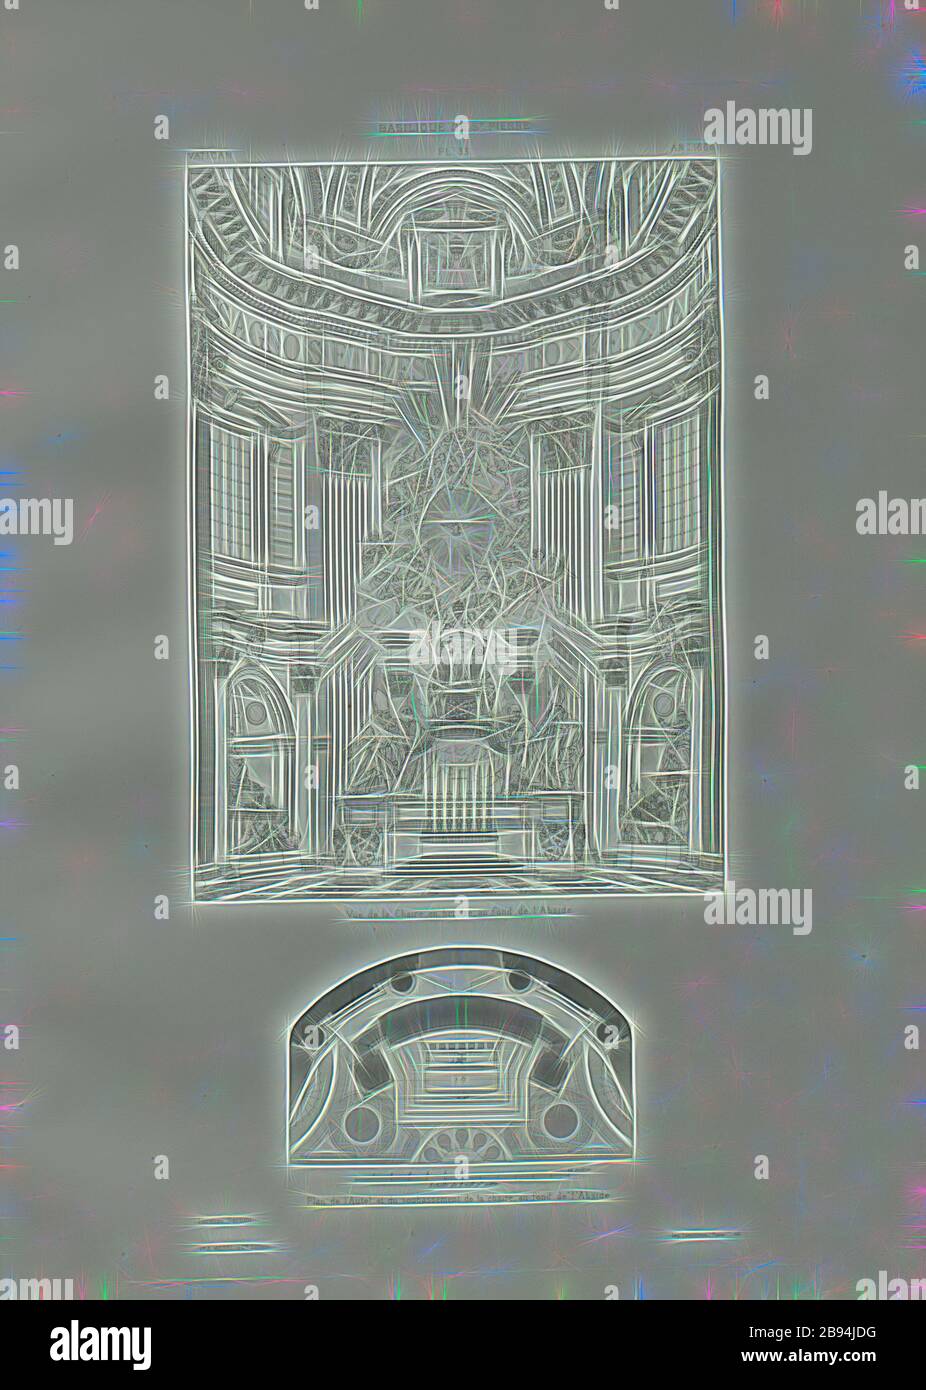 View of the bronze pulpit at the bottom of the Apse, Plan of the Altar and Basin of the pulpit at the bottom of the Apse, Illustration of the altar in St. Peter's Basilica from the 17th century, signed: Lorenzo Bernini, Pl. 33, S. 99, Bernini, Lorenzo, 1882, Paul Marie LeTarouilly: Le Vatican et la basilique de Saint-Pierre de Rome. Paris: Vve A. Morel et Cie., Editeurs, 1882, Reimagined by Gibon, design of warm cheerful glowing of brightness and light rays radiance. Classic art reinvented with a modern twist. Photography inspired by futurism, embracing dynamic energy of modern technology, mov Stock Photo